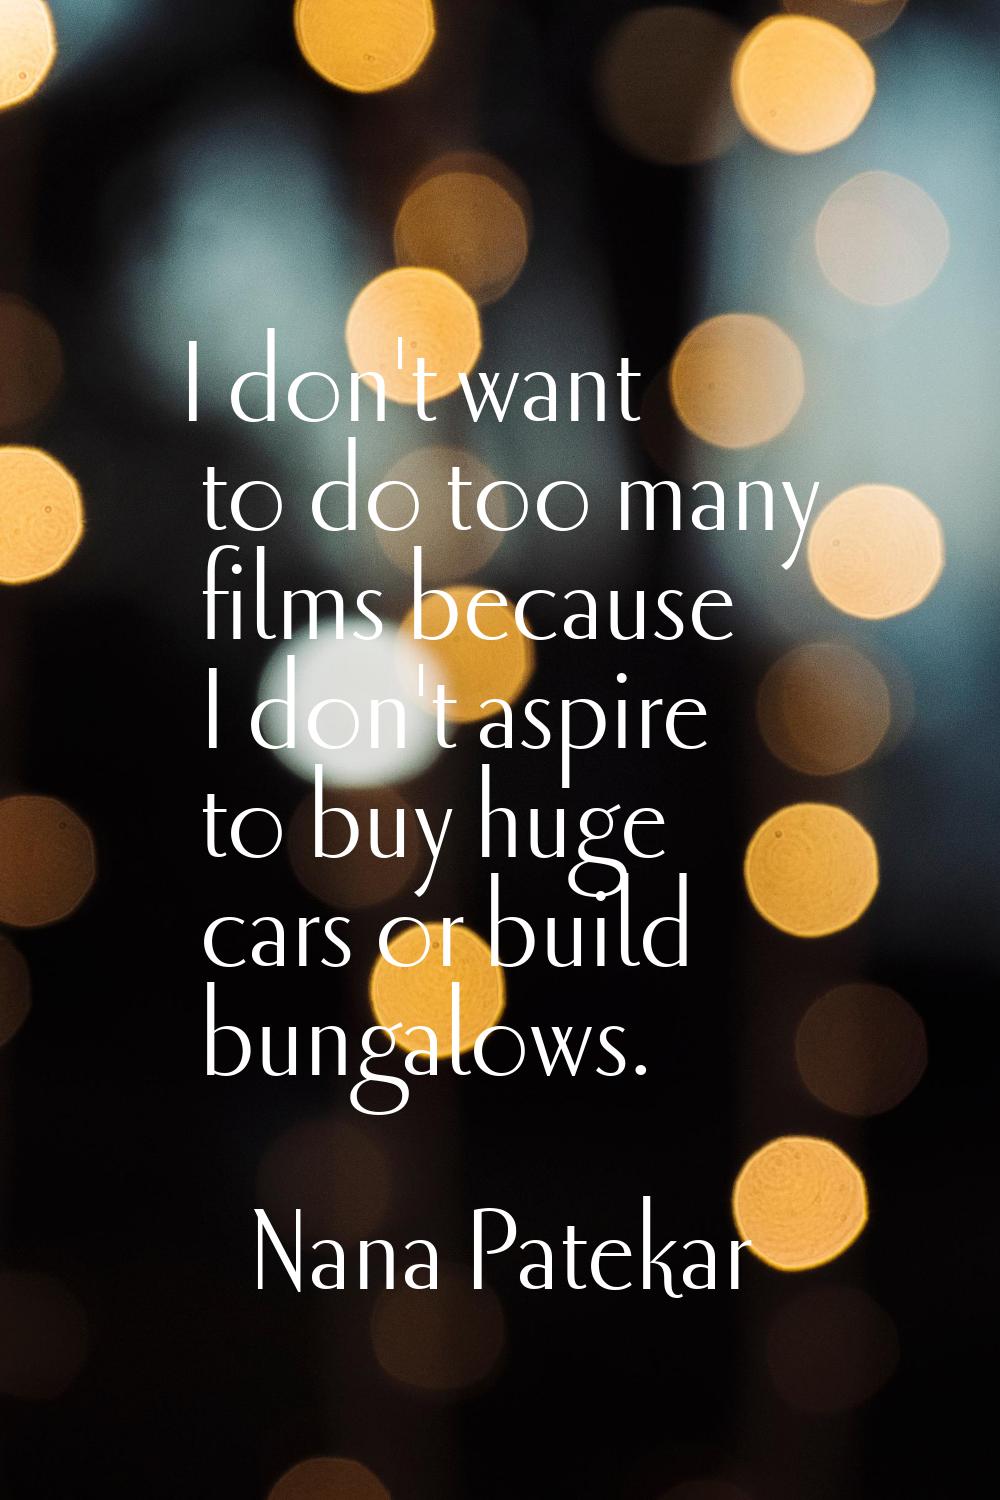 I don't want to do too many films because I don't aspire to buy huge cars or build bungalows.